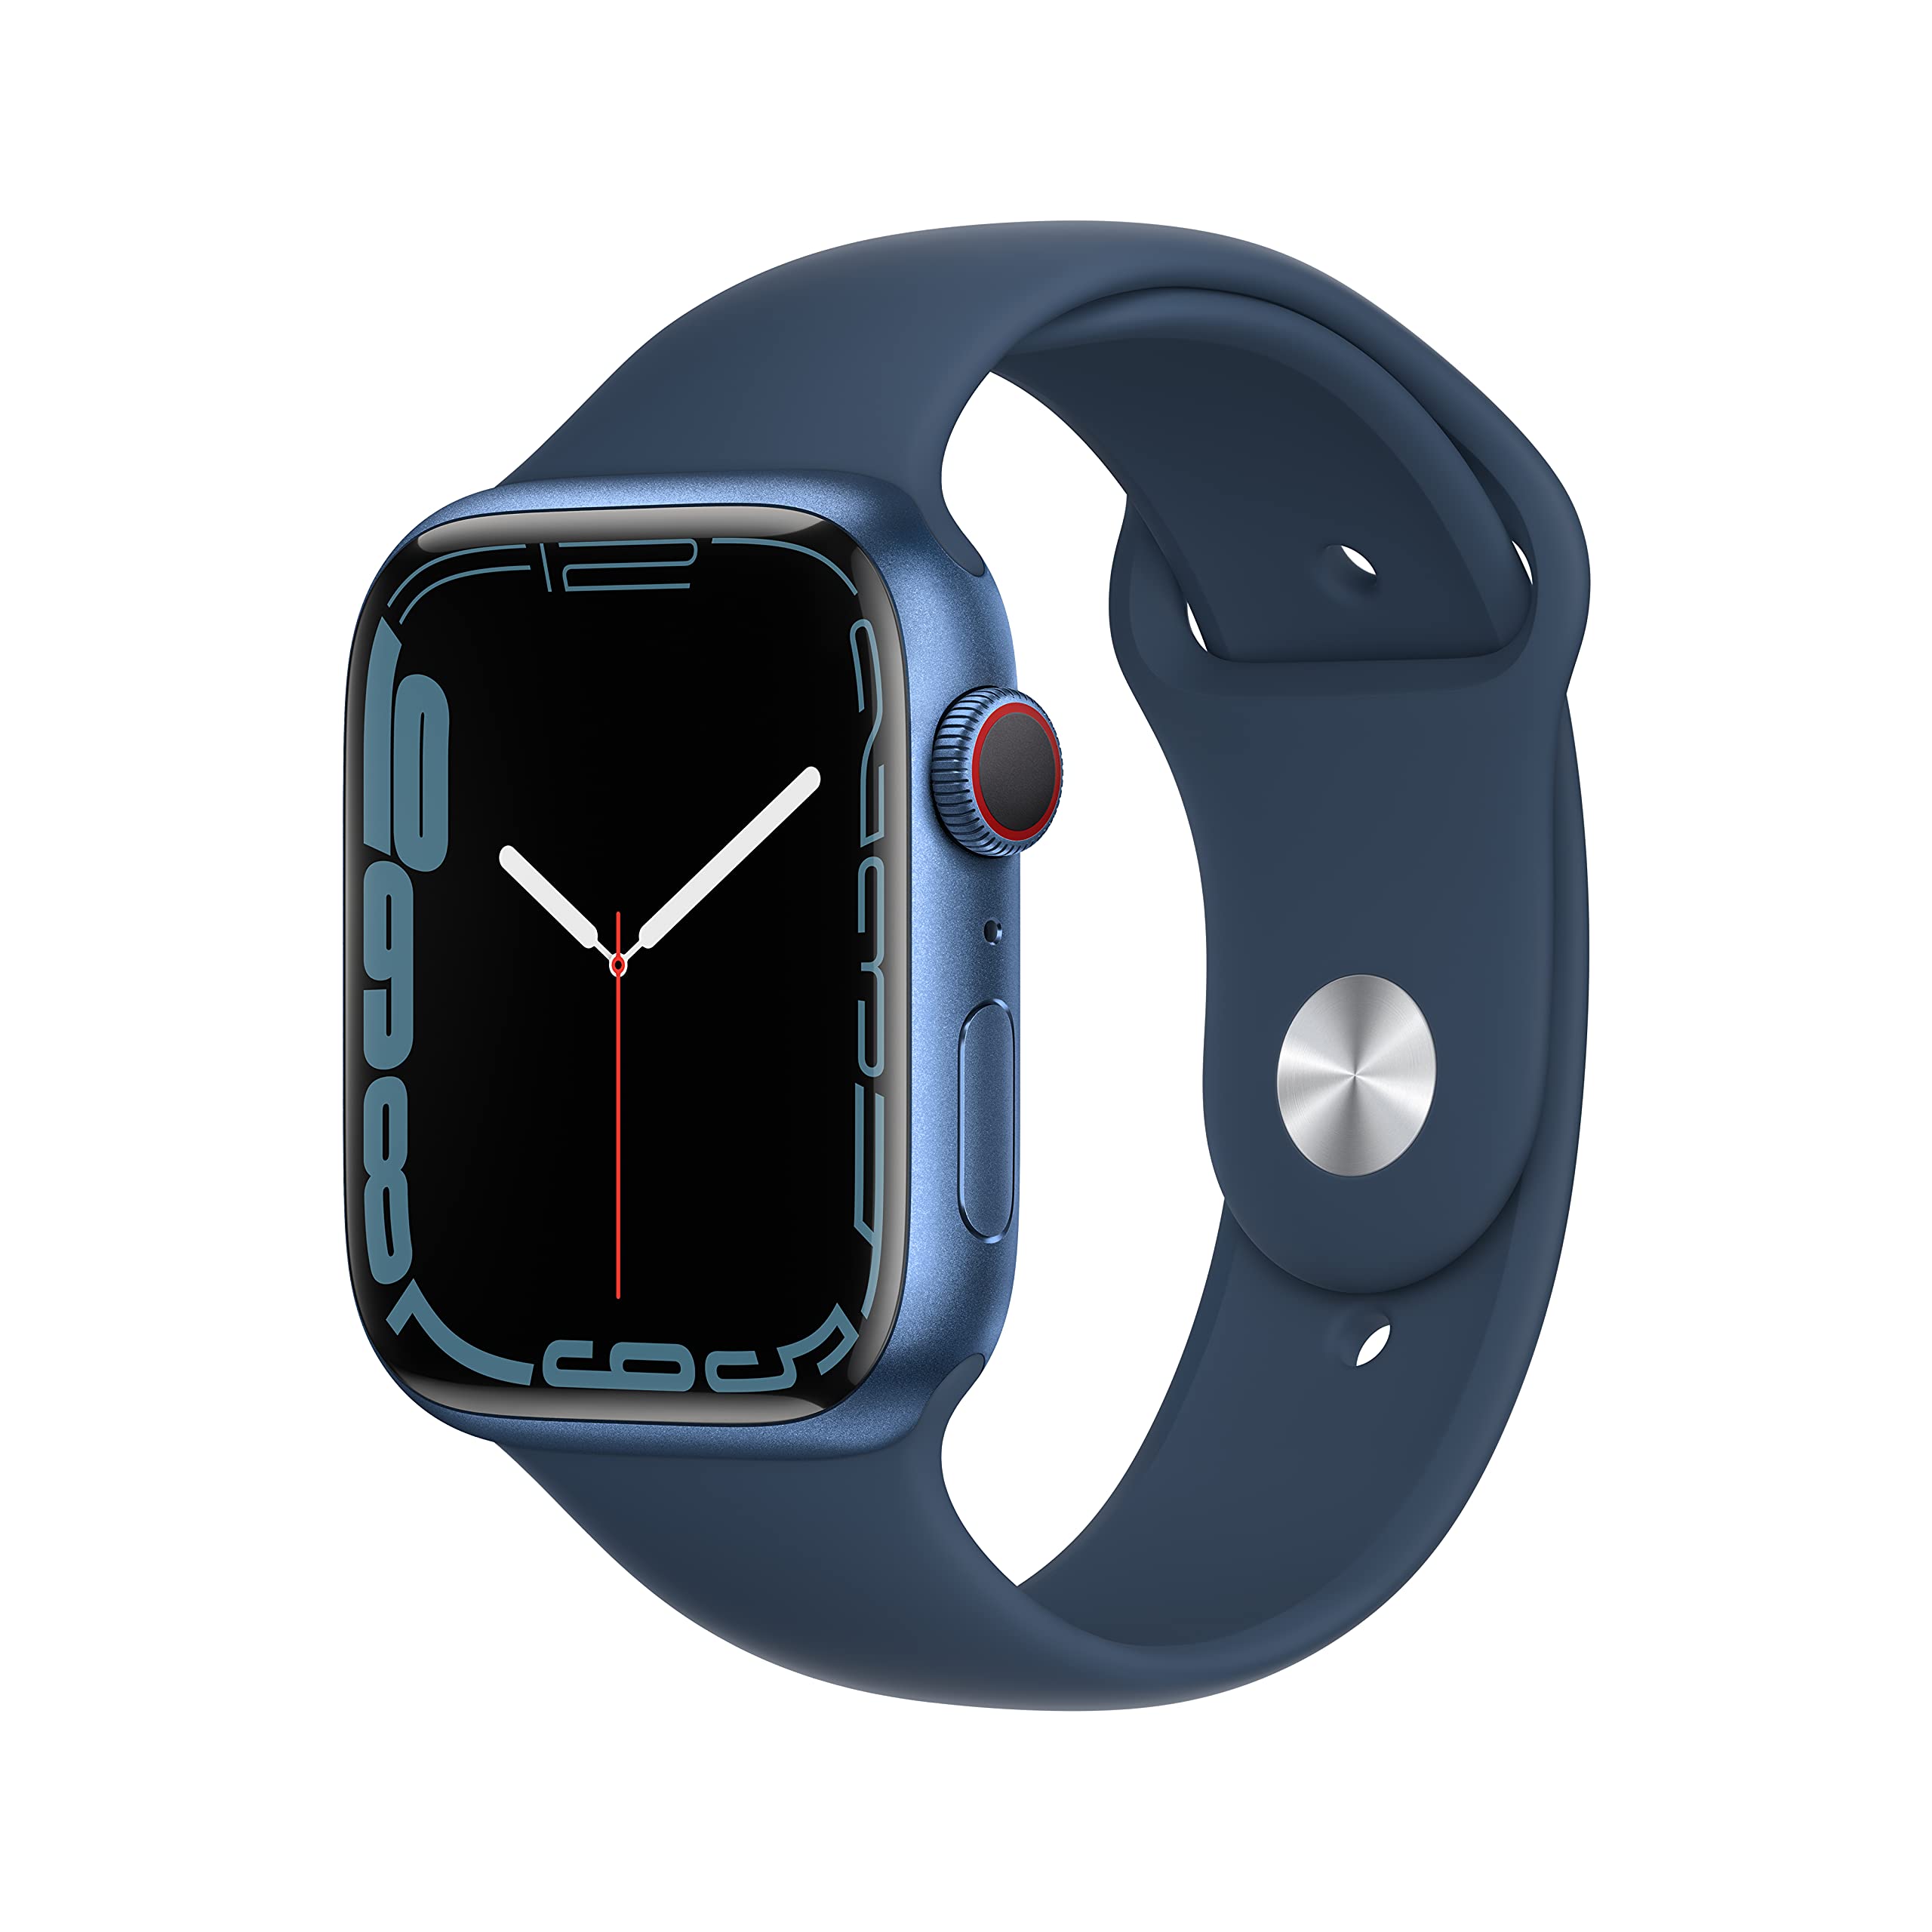 Apple Watch Series 7 [GPS + Cellular 45mm] Smart Watch w/Blue Aluminum Case with Abyss Blue Sport Band. Fitness Tracker, Blood Oxygen & ECG Apps, Always-On Retina Display, Water Resistant